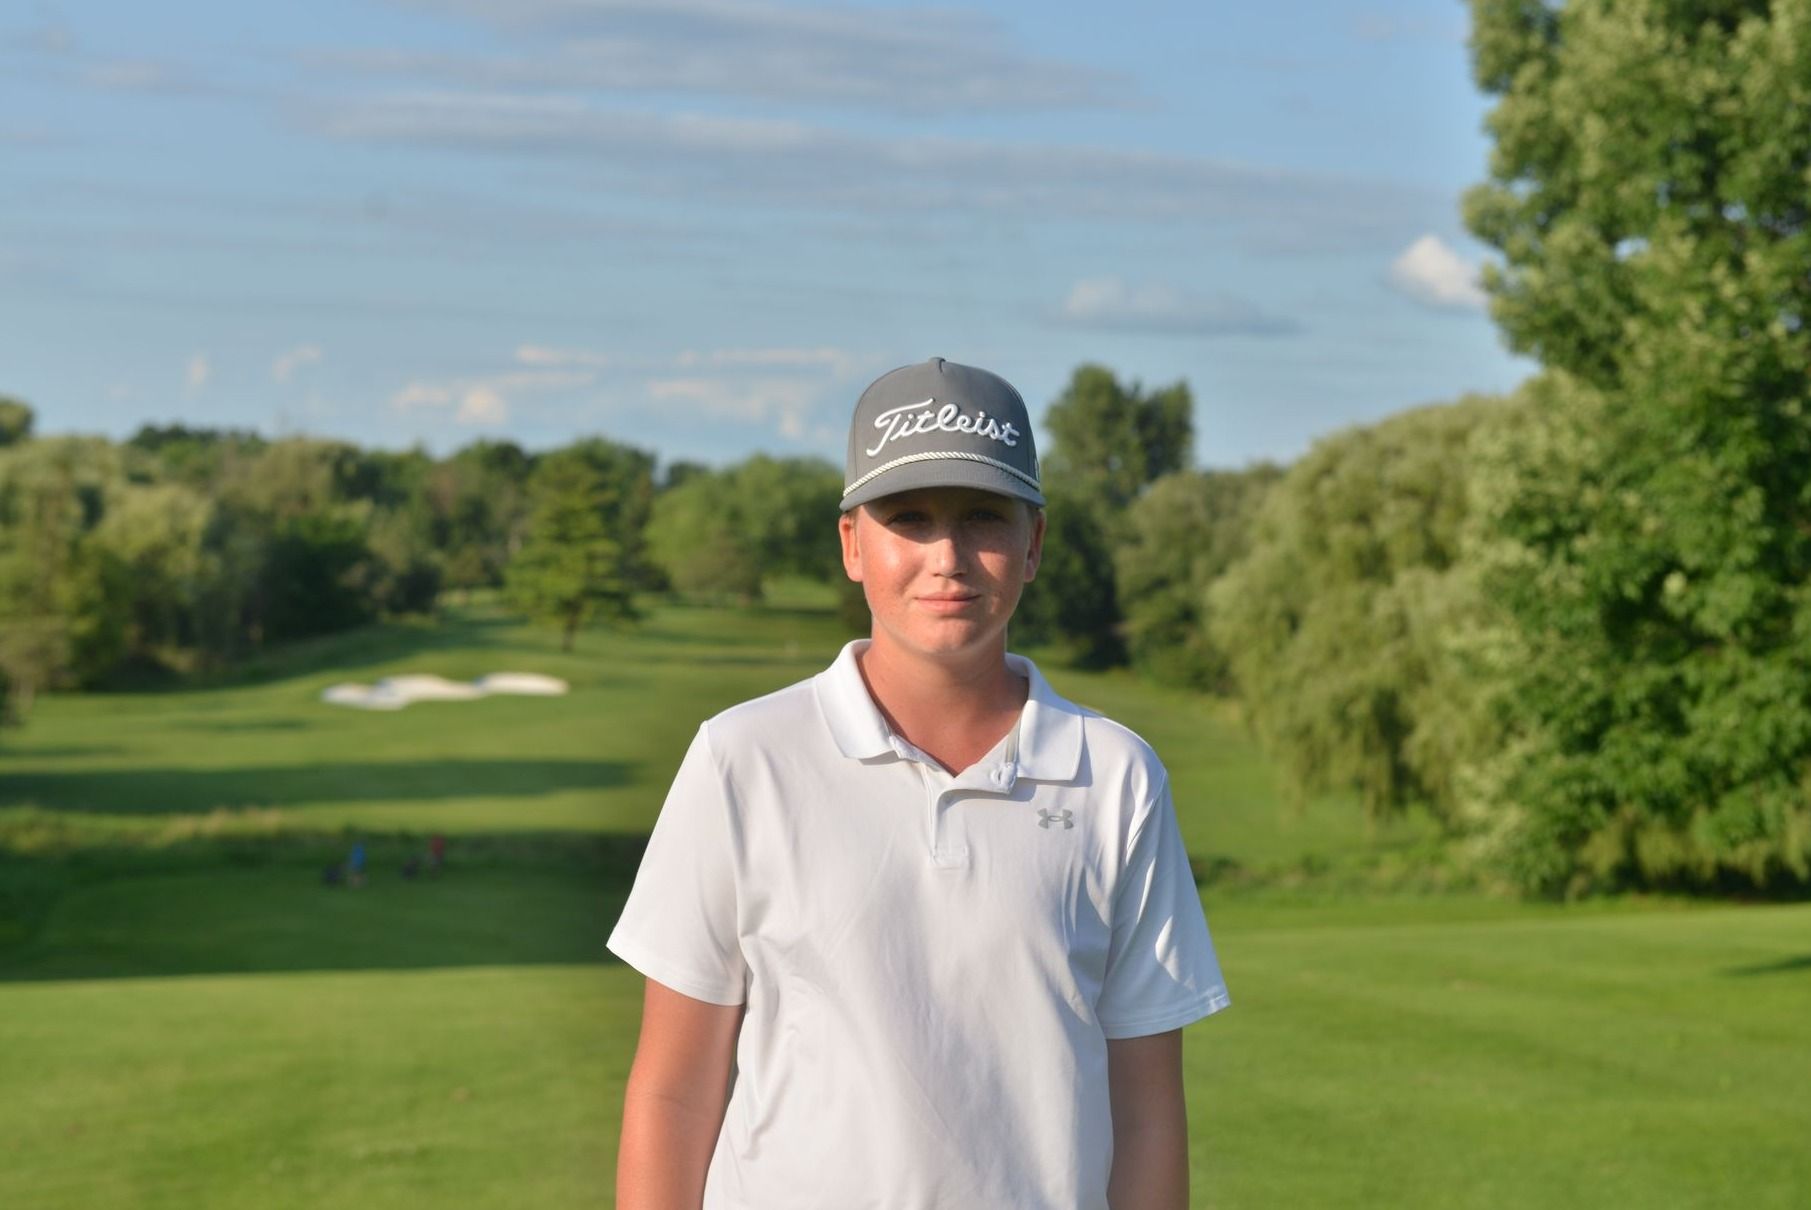 Young Elmira golfer notches hole-in-one at MJT tournament